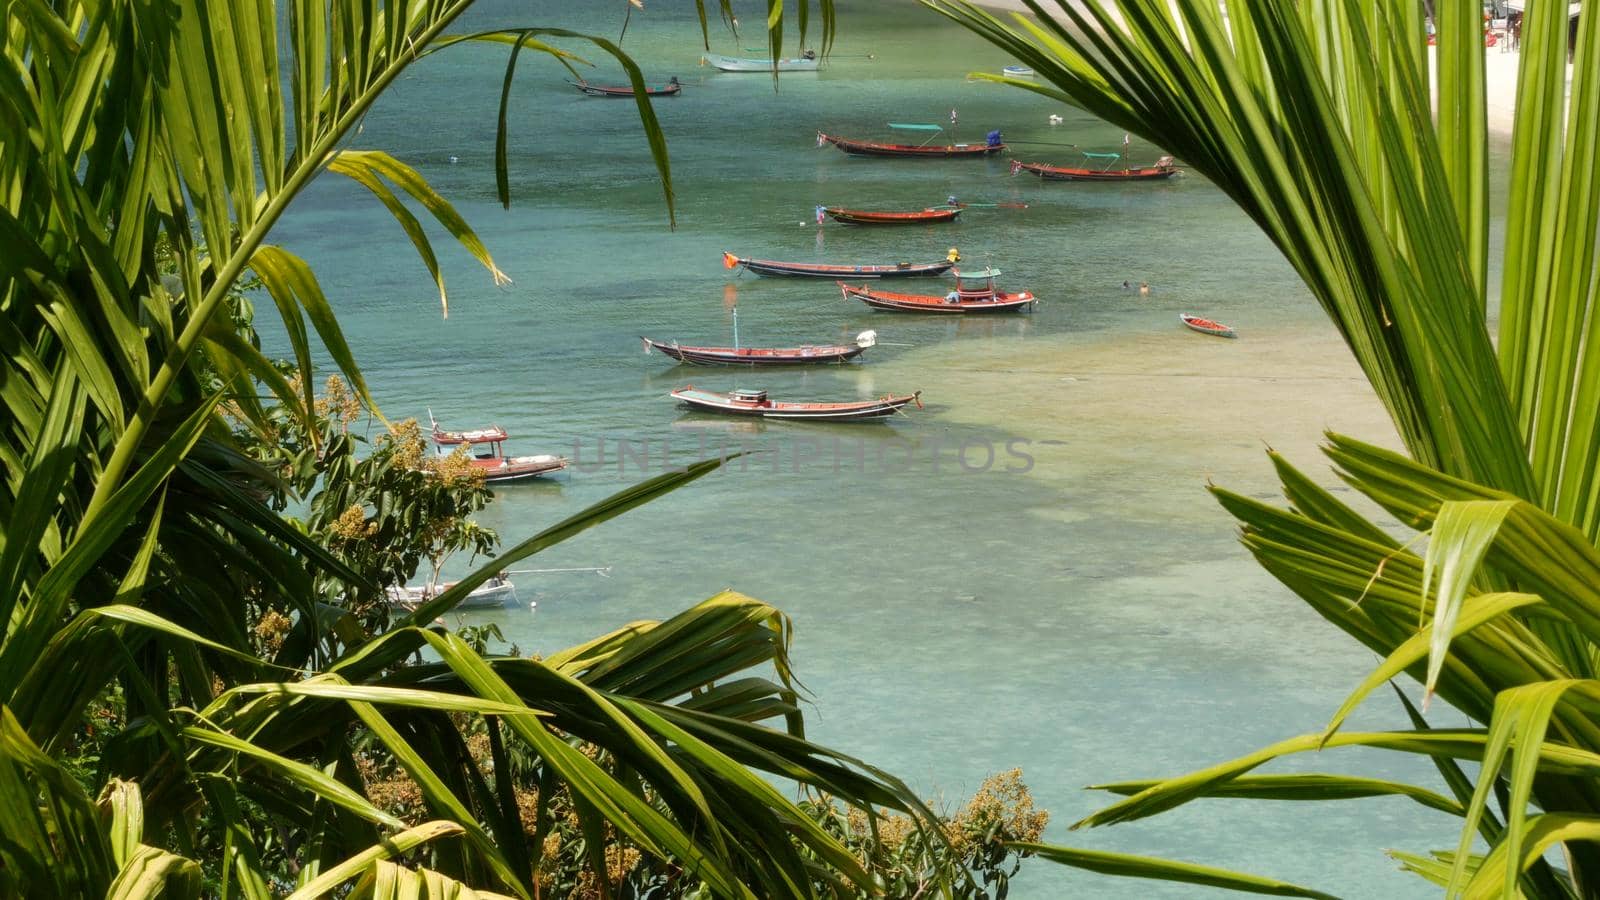 Boats near shore of island. Traditional colorful fishing vessels floating on calm blue water near white sand coast of tropical exotic paradise island. View through green palm leaves. Koh Phangan by DogoraSun